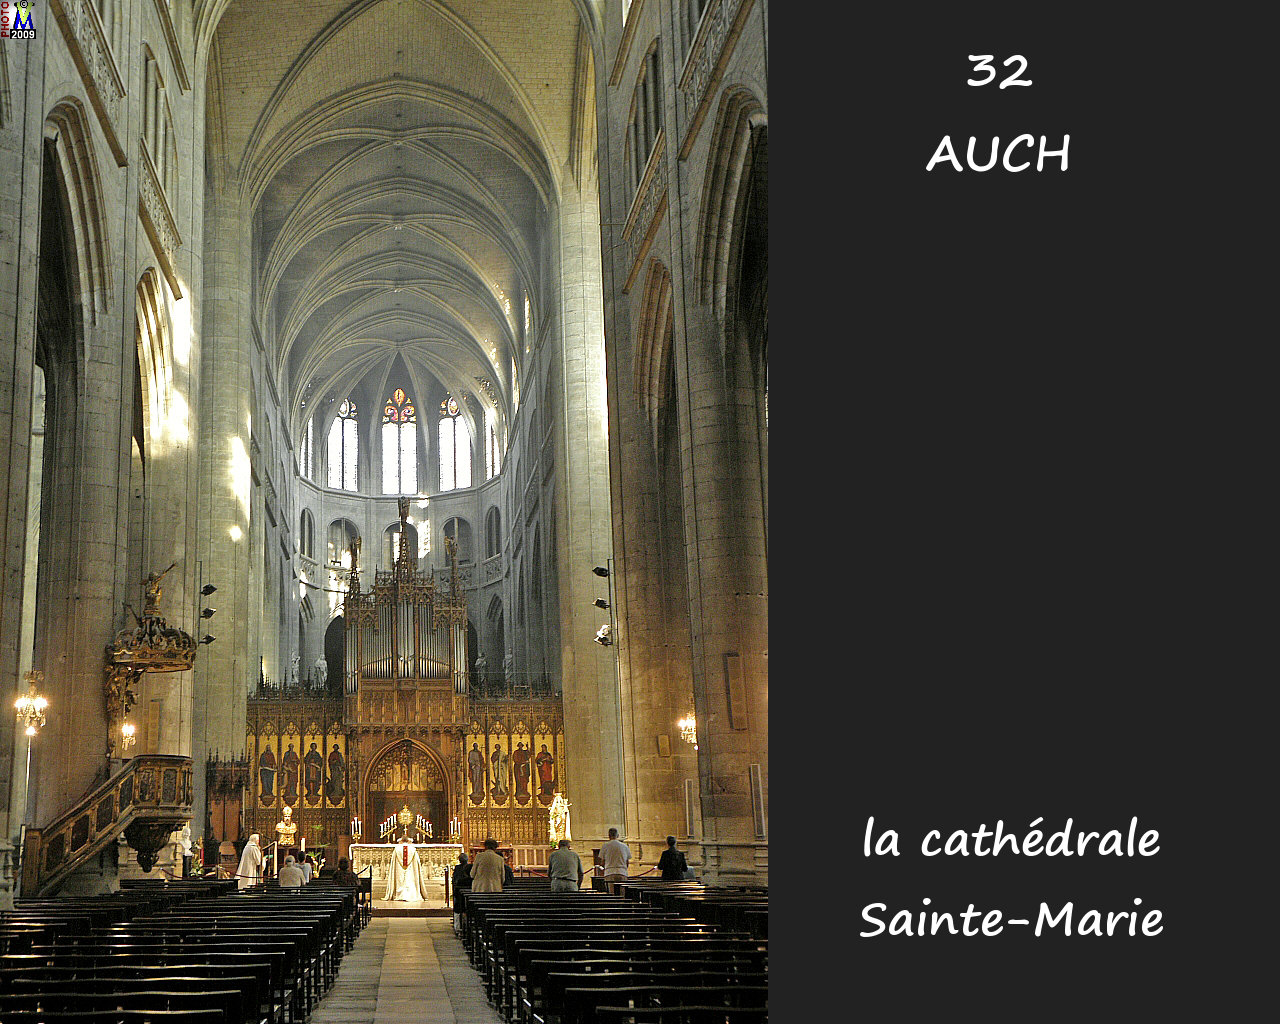 32AUCH_cathedrale_200.jpg